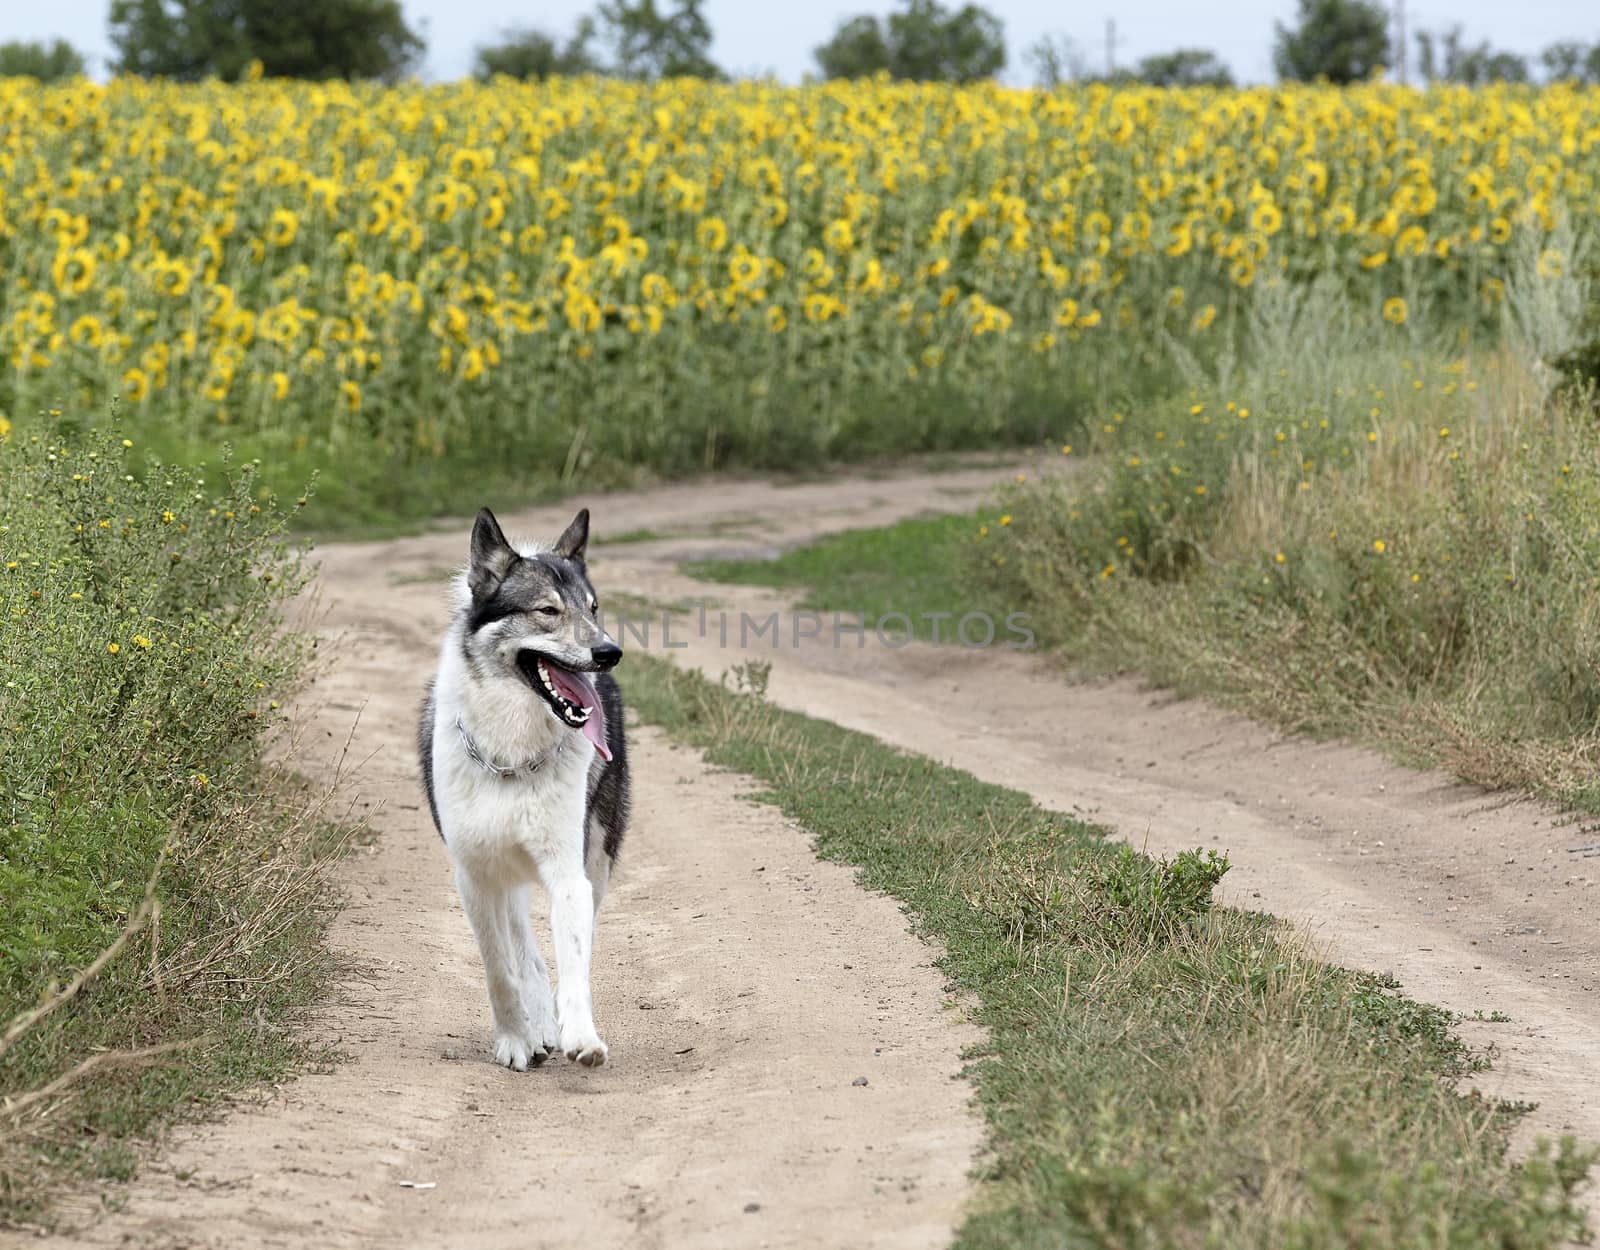 A hunting dog Siberian Laika outdoors walks along a dirt road among the fields of a sunflower and looks closely at the search for prey